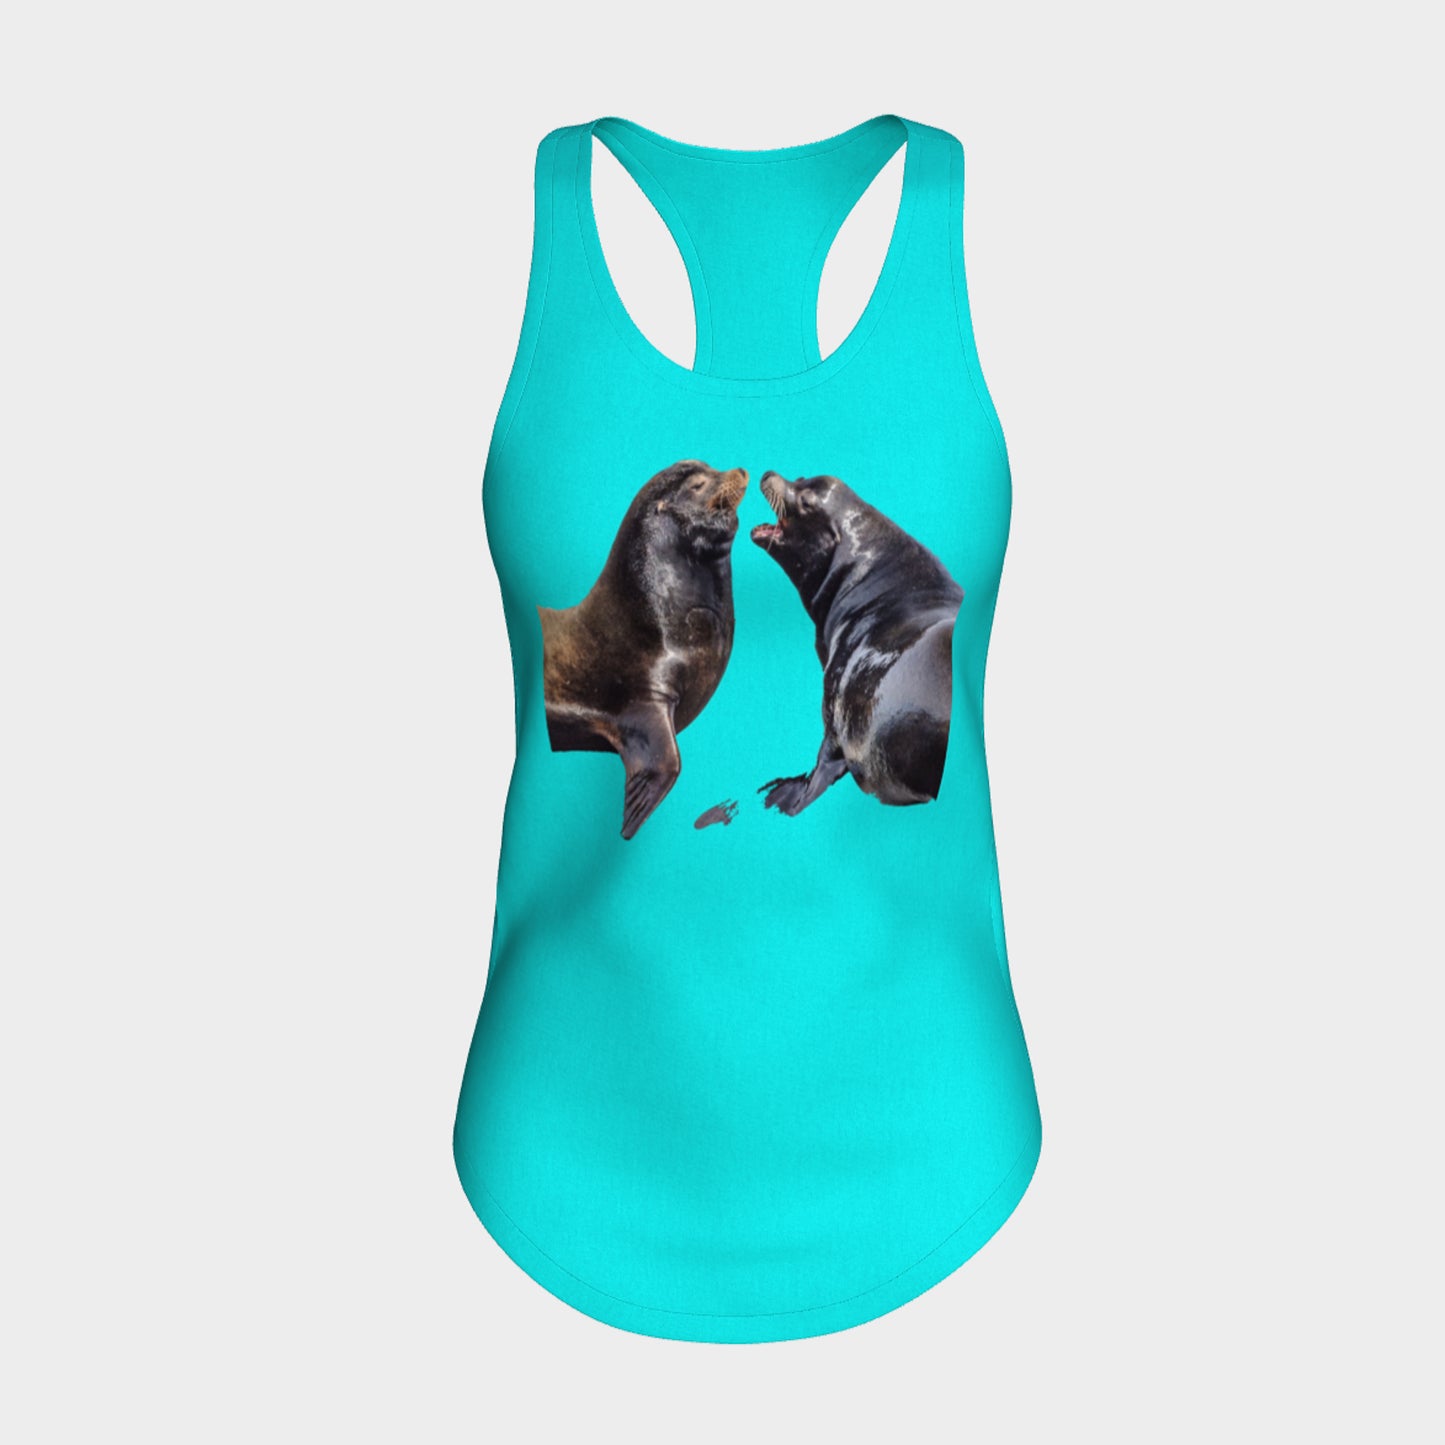 Communication Sea Lions Racerback Tank Top  Excellent choice for the summer or for working out.   Made from 60% spun cotton and 40% poly for a mix of comfort and performance, you get it all (including my photography and digital art) with this custom printed racerback tank top.  Van Isle Goddess Next Level racerback tank top will quickly become you go-to tank top because of the super comfy fit!